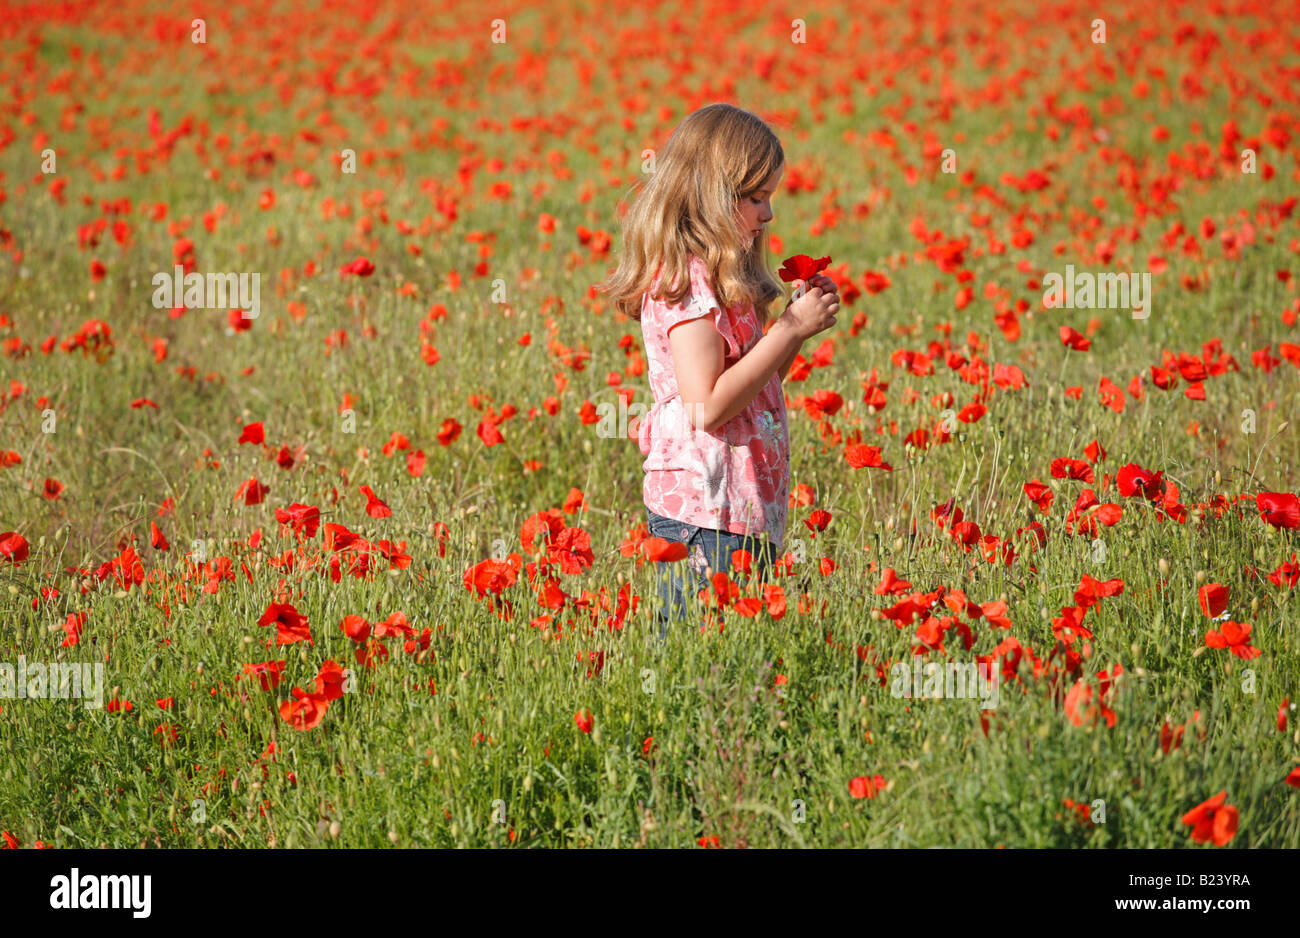 An eight year old girl examining a flower in a poppy field. Stock Photo